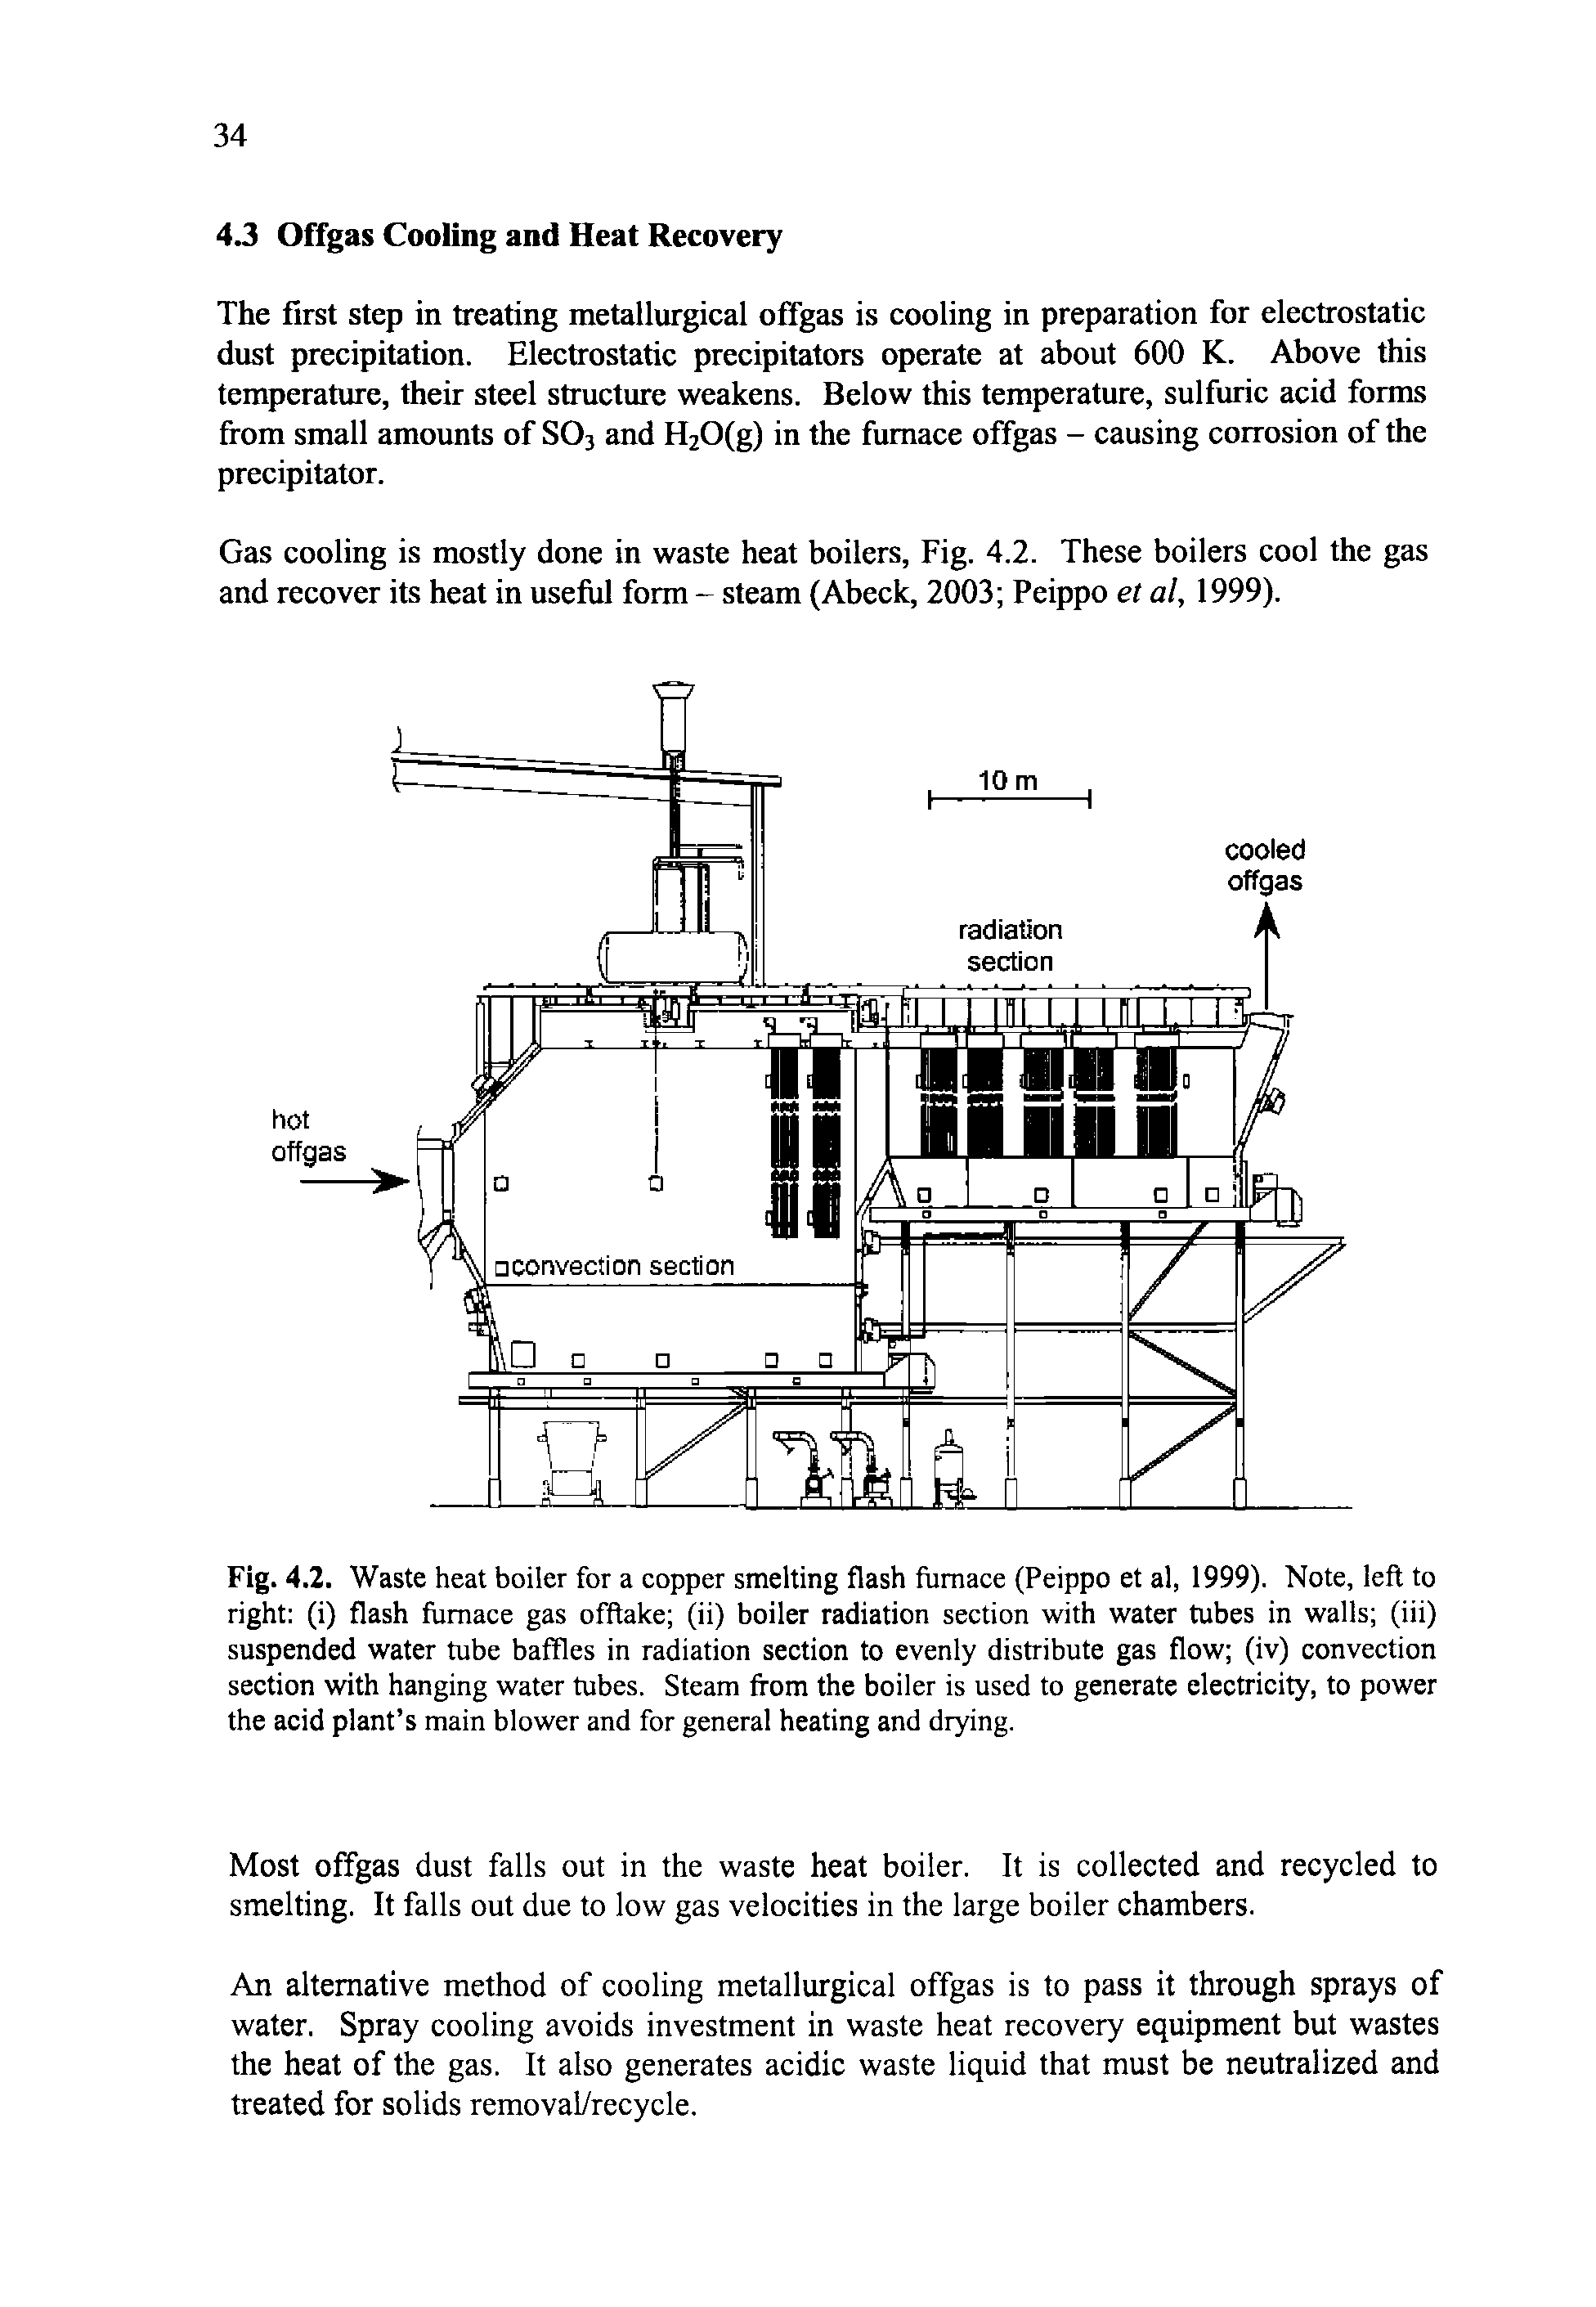 Fig. 4.2. Waste heat boiler for a copper smelting flash furnace (Peippo et al, 1999). Note, left to right (i) flash furnace gas offtake (ii) boiler radiation section with water tubes in walls (iii) suspended water tube baffles in radiation section to evenly distribute gas flow (iv) convection section with hanging water tubes. Steam from the boiler is used to generate electricity, to power the acid plant s main blower and for general heating and drying.